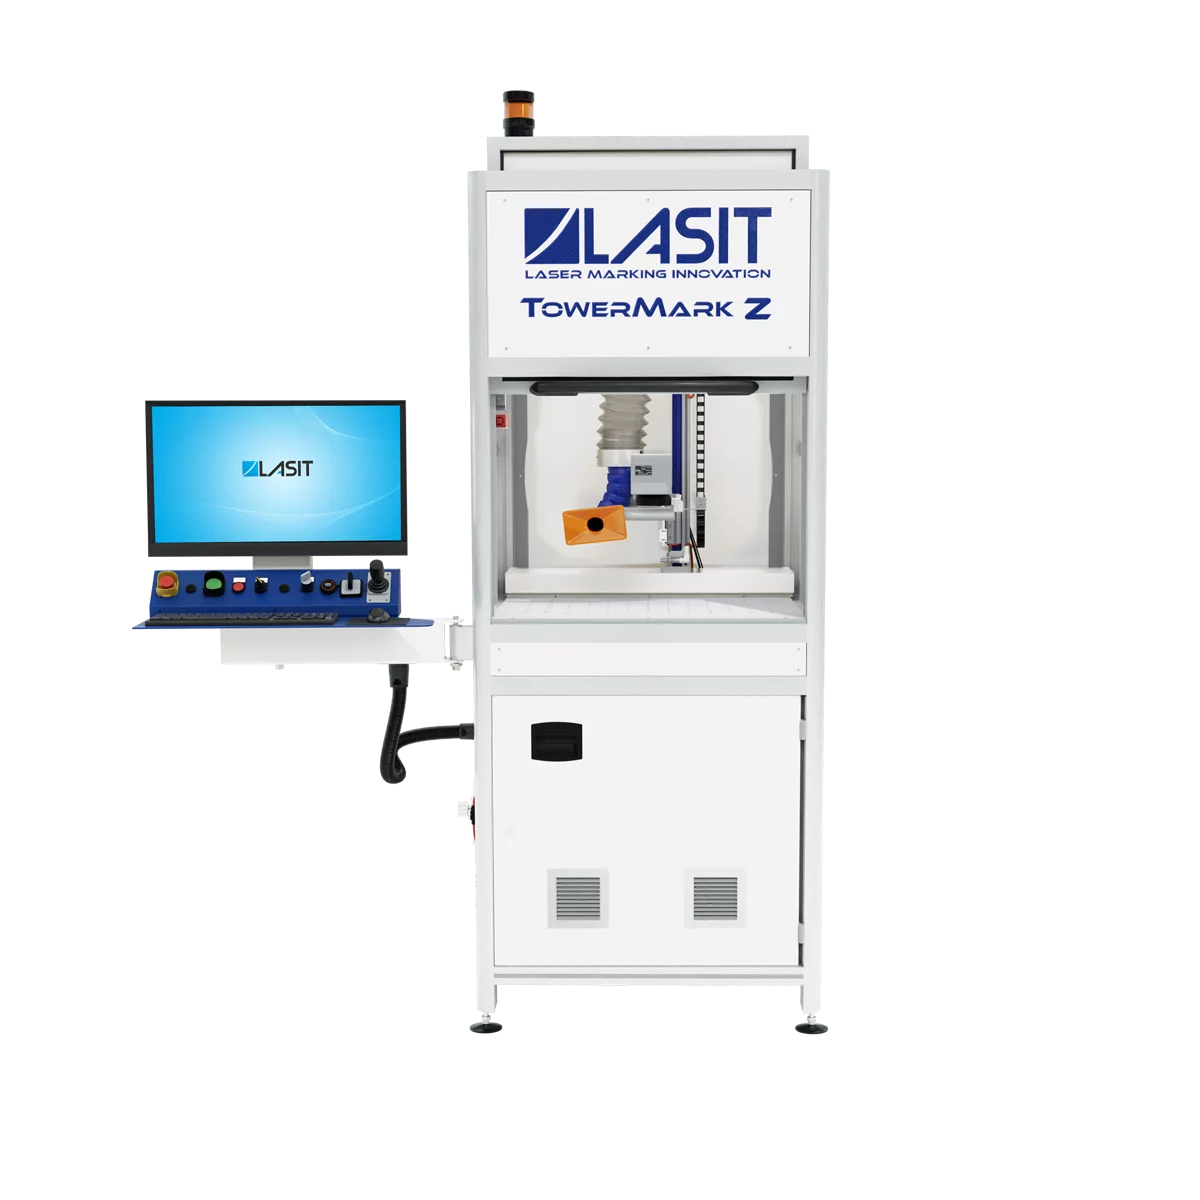 Towermark-Z-front LASIT answers the ten most common questions on laser marking